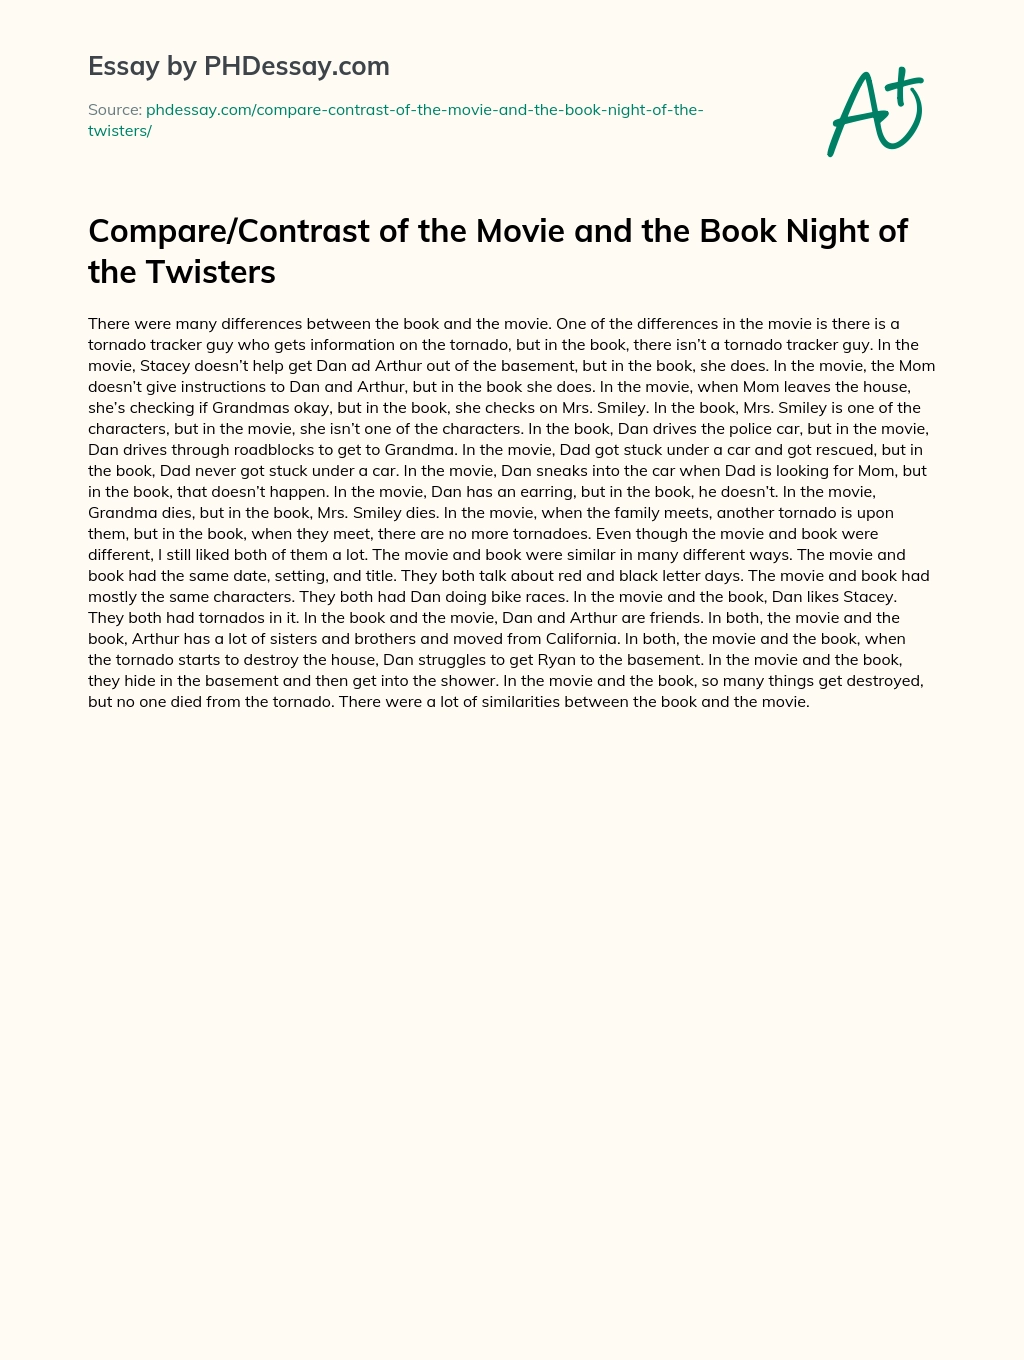 Compare/Contrast of the Movie and the Book Night of the Twisters essay